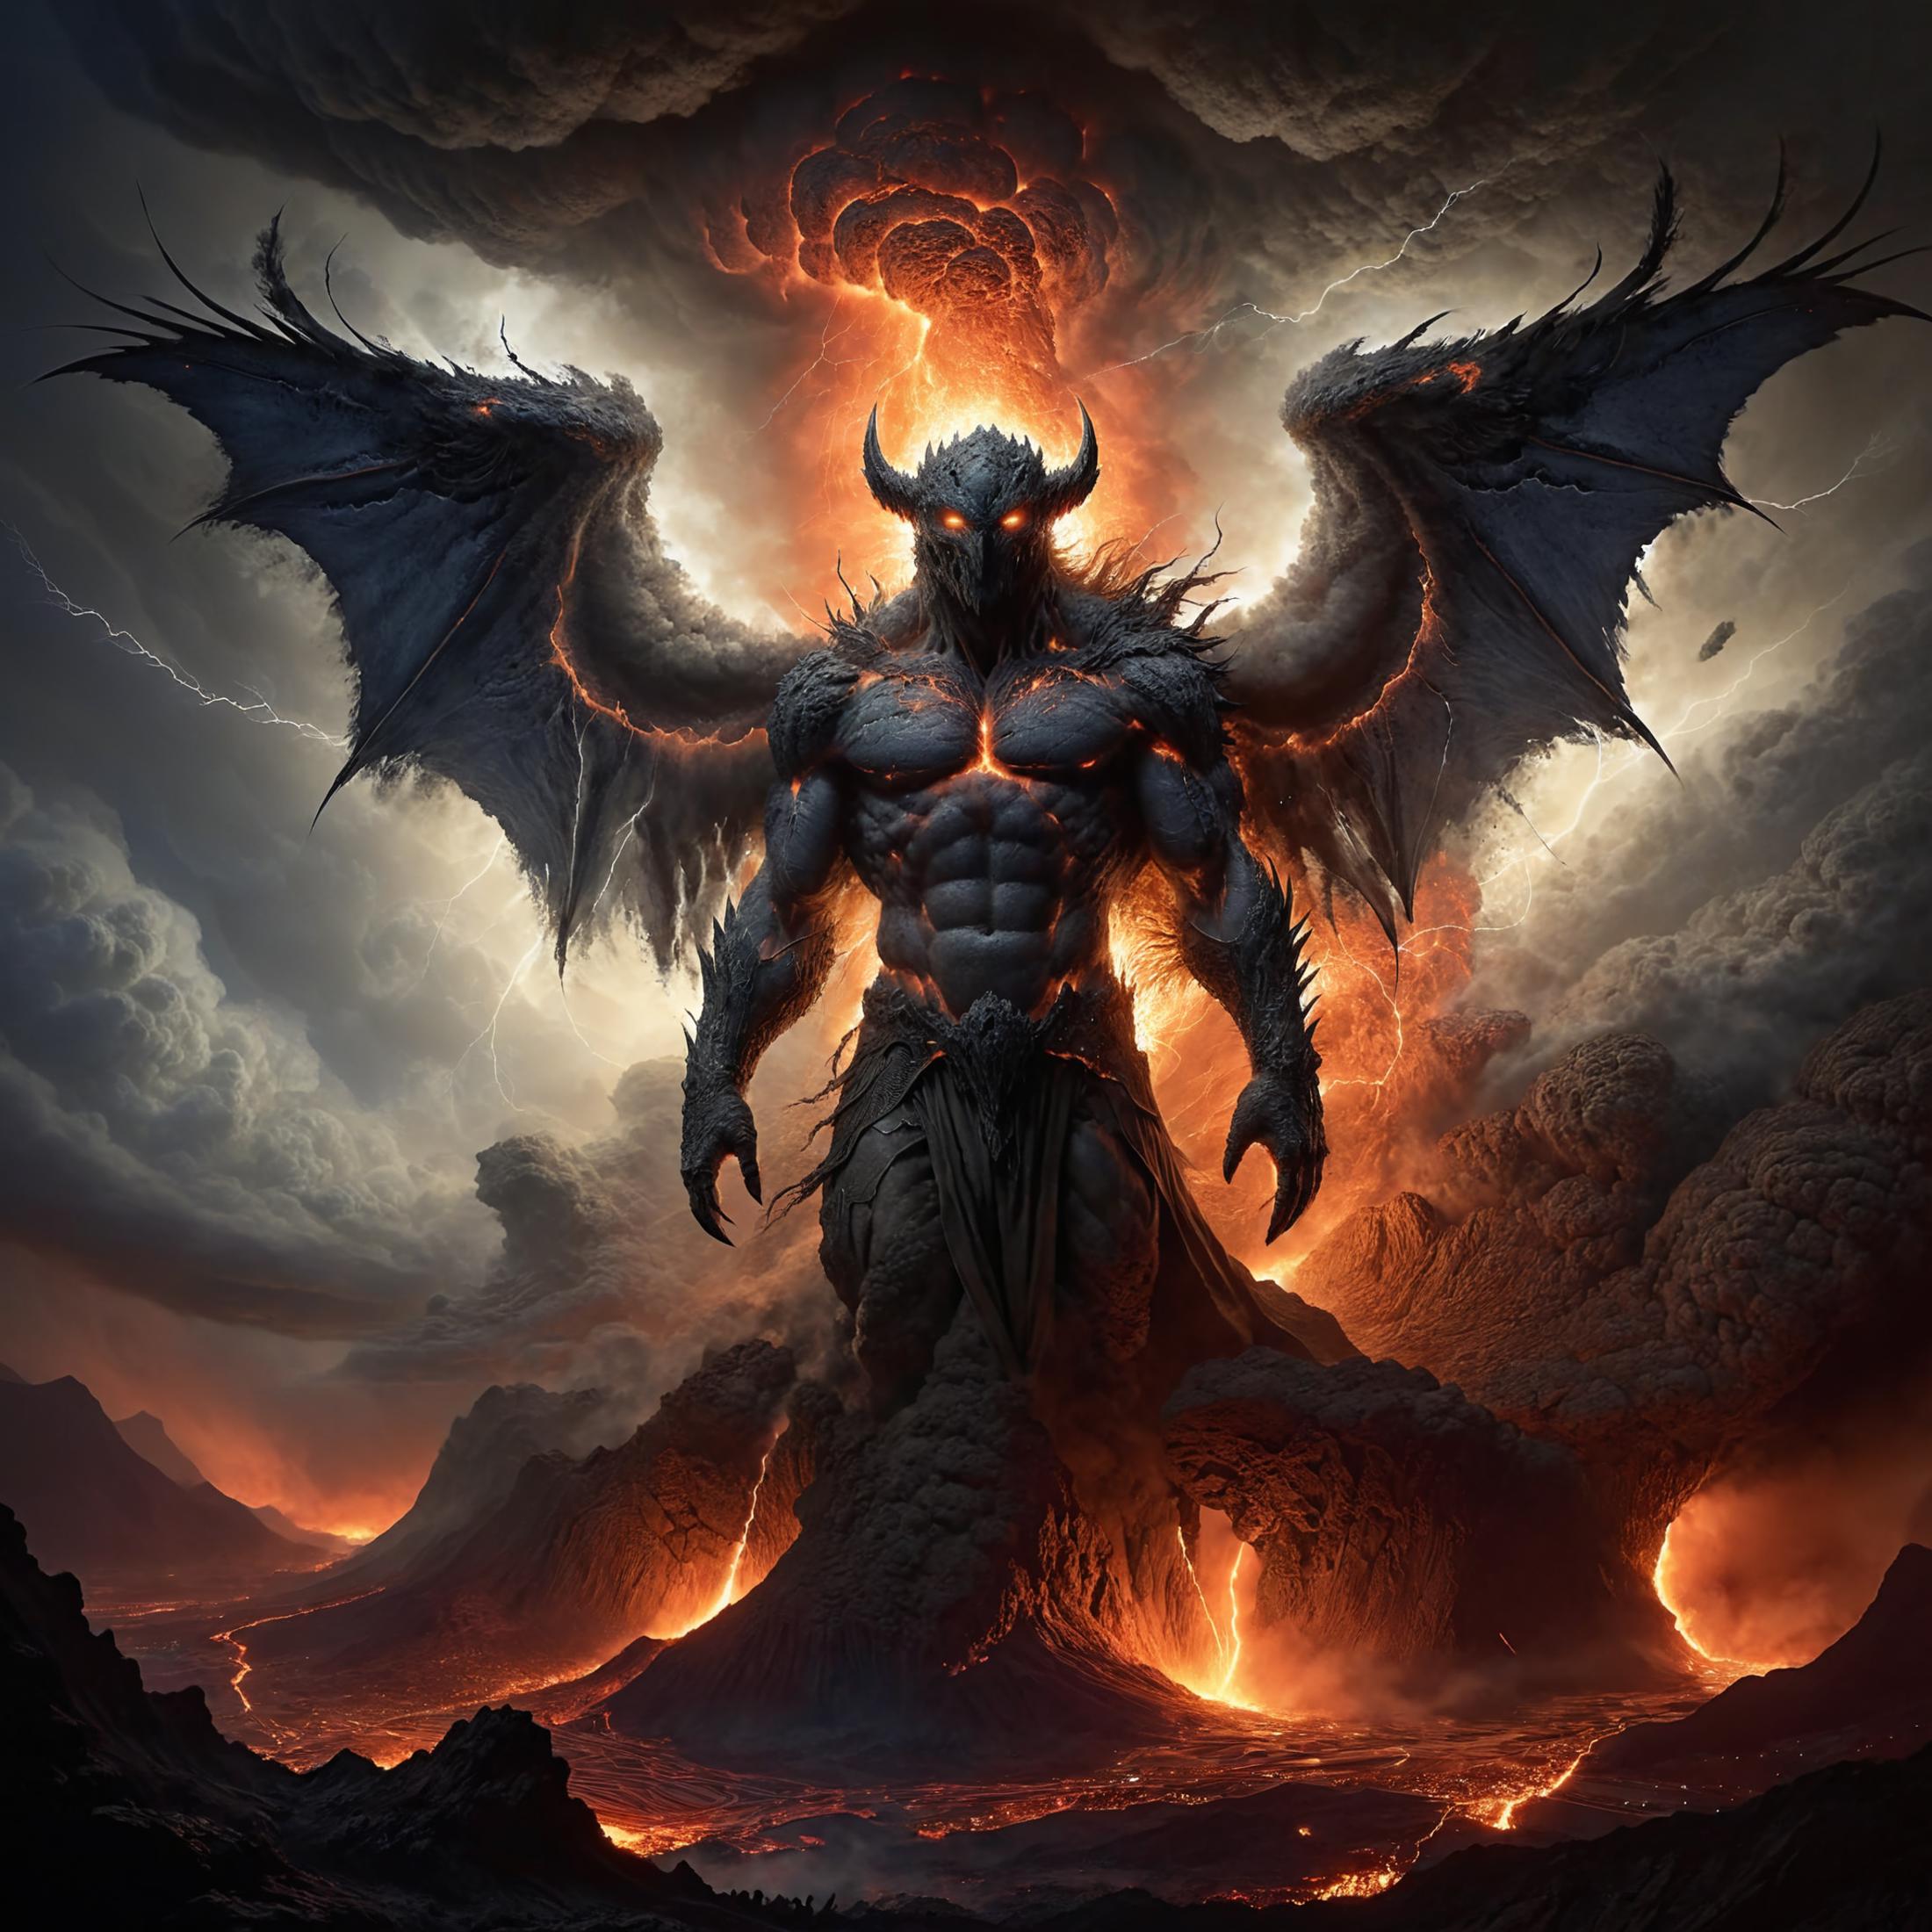 A powerful demon with horns and wings stands on a volcanic mountain, surrounded by flames.